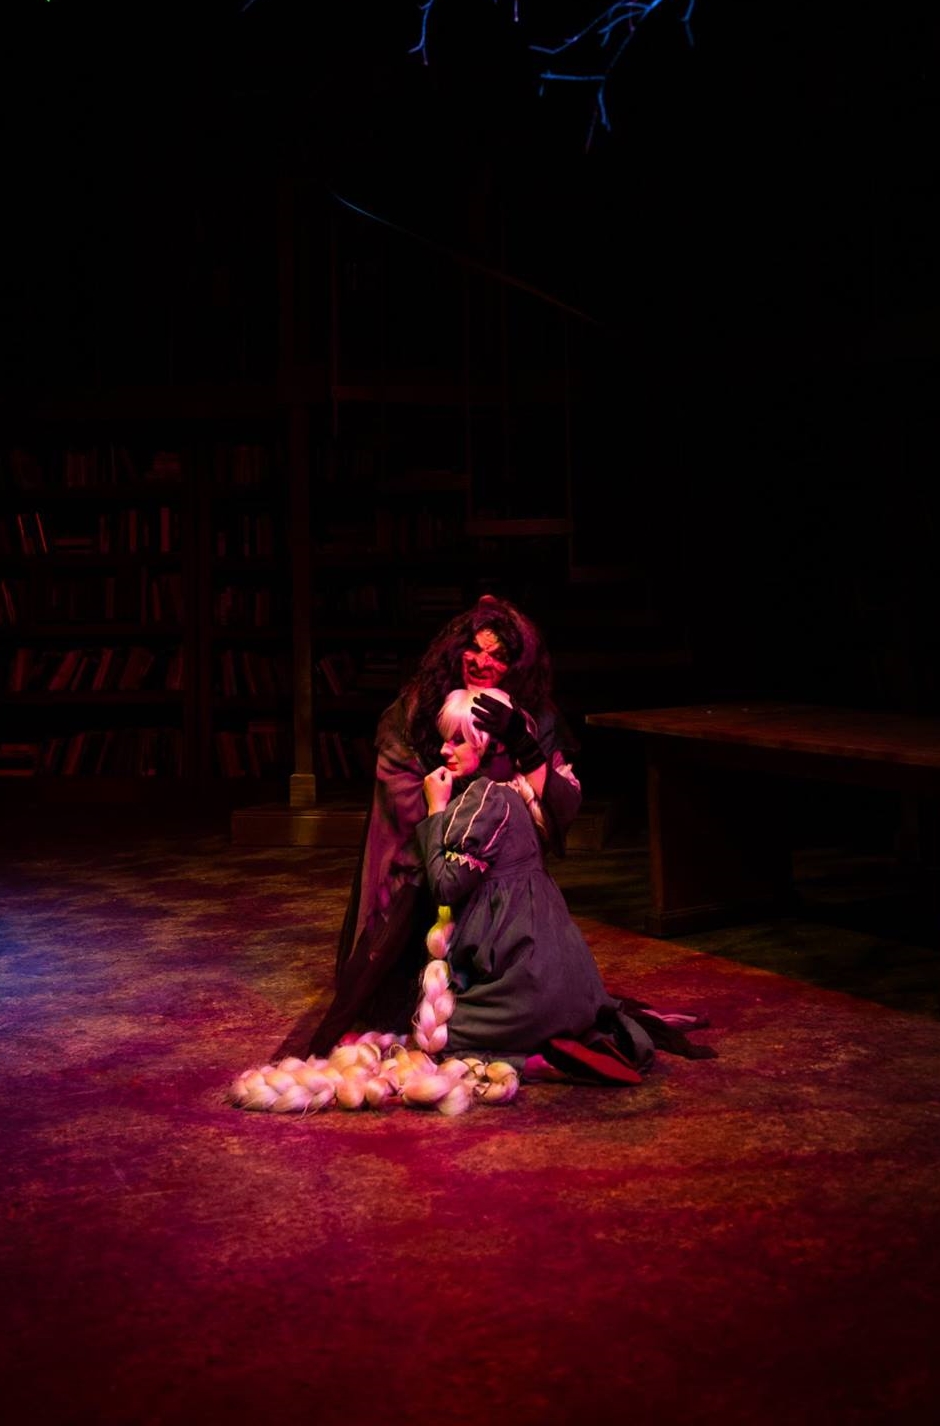  "Stay With Me." Into the Woods at NextStop Theatre.&nbsp;Directed by Evan Hoffmann, Scenic Design by Steven Royal, Costumes by Kathy Dunlap. 